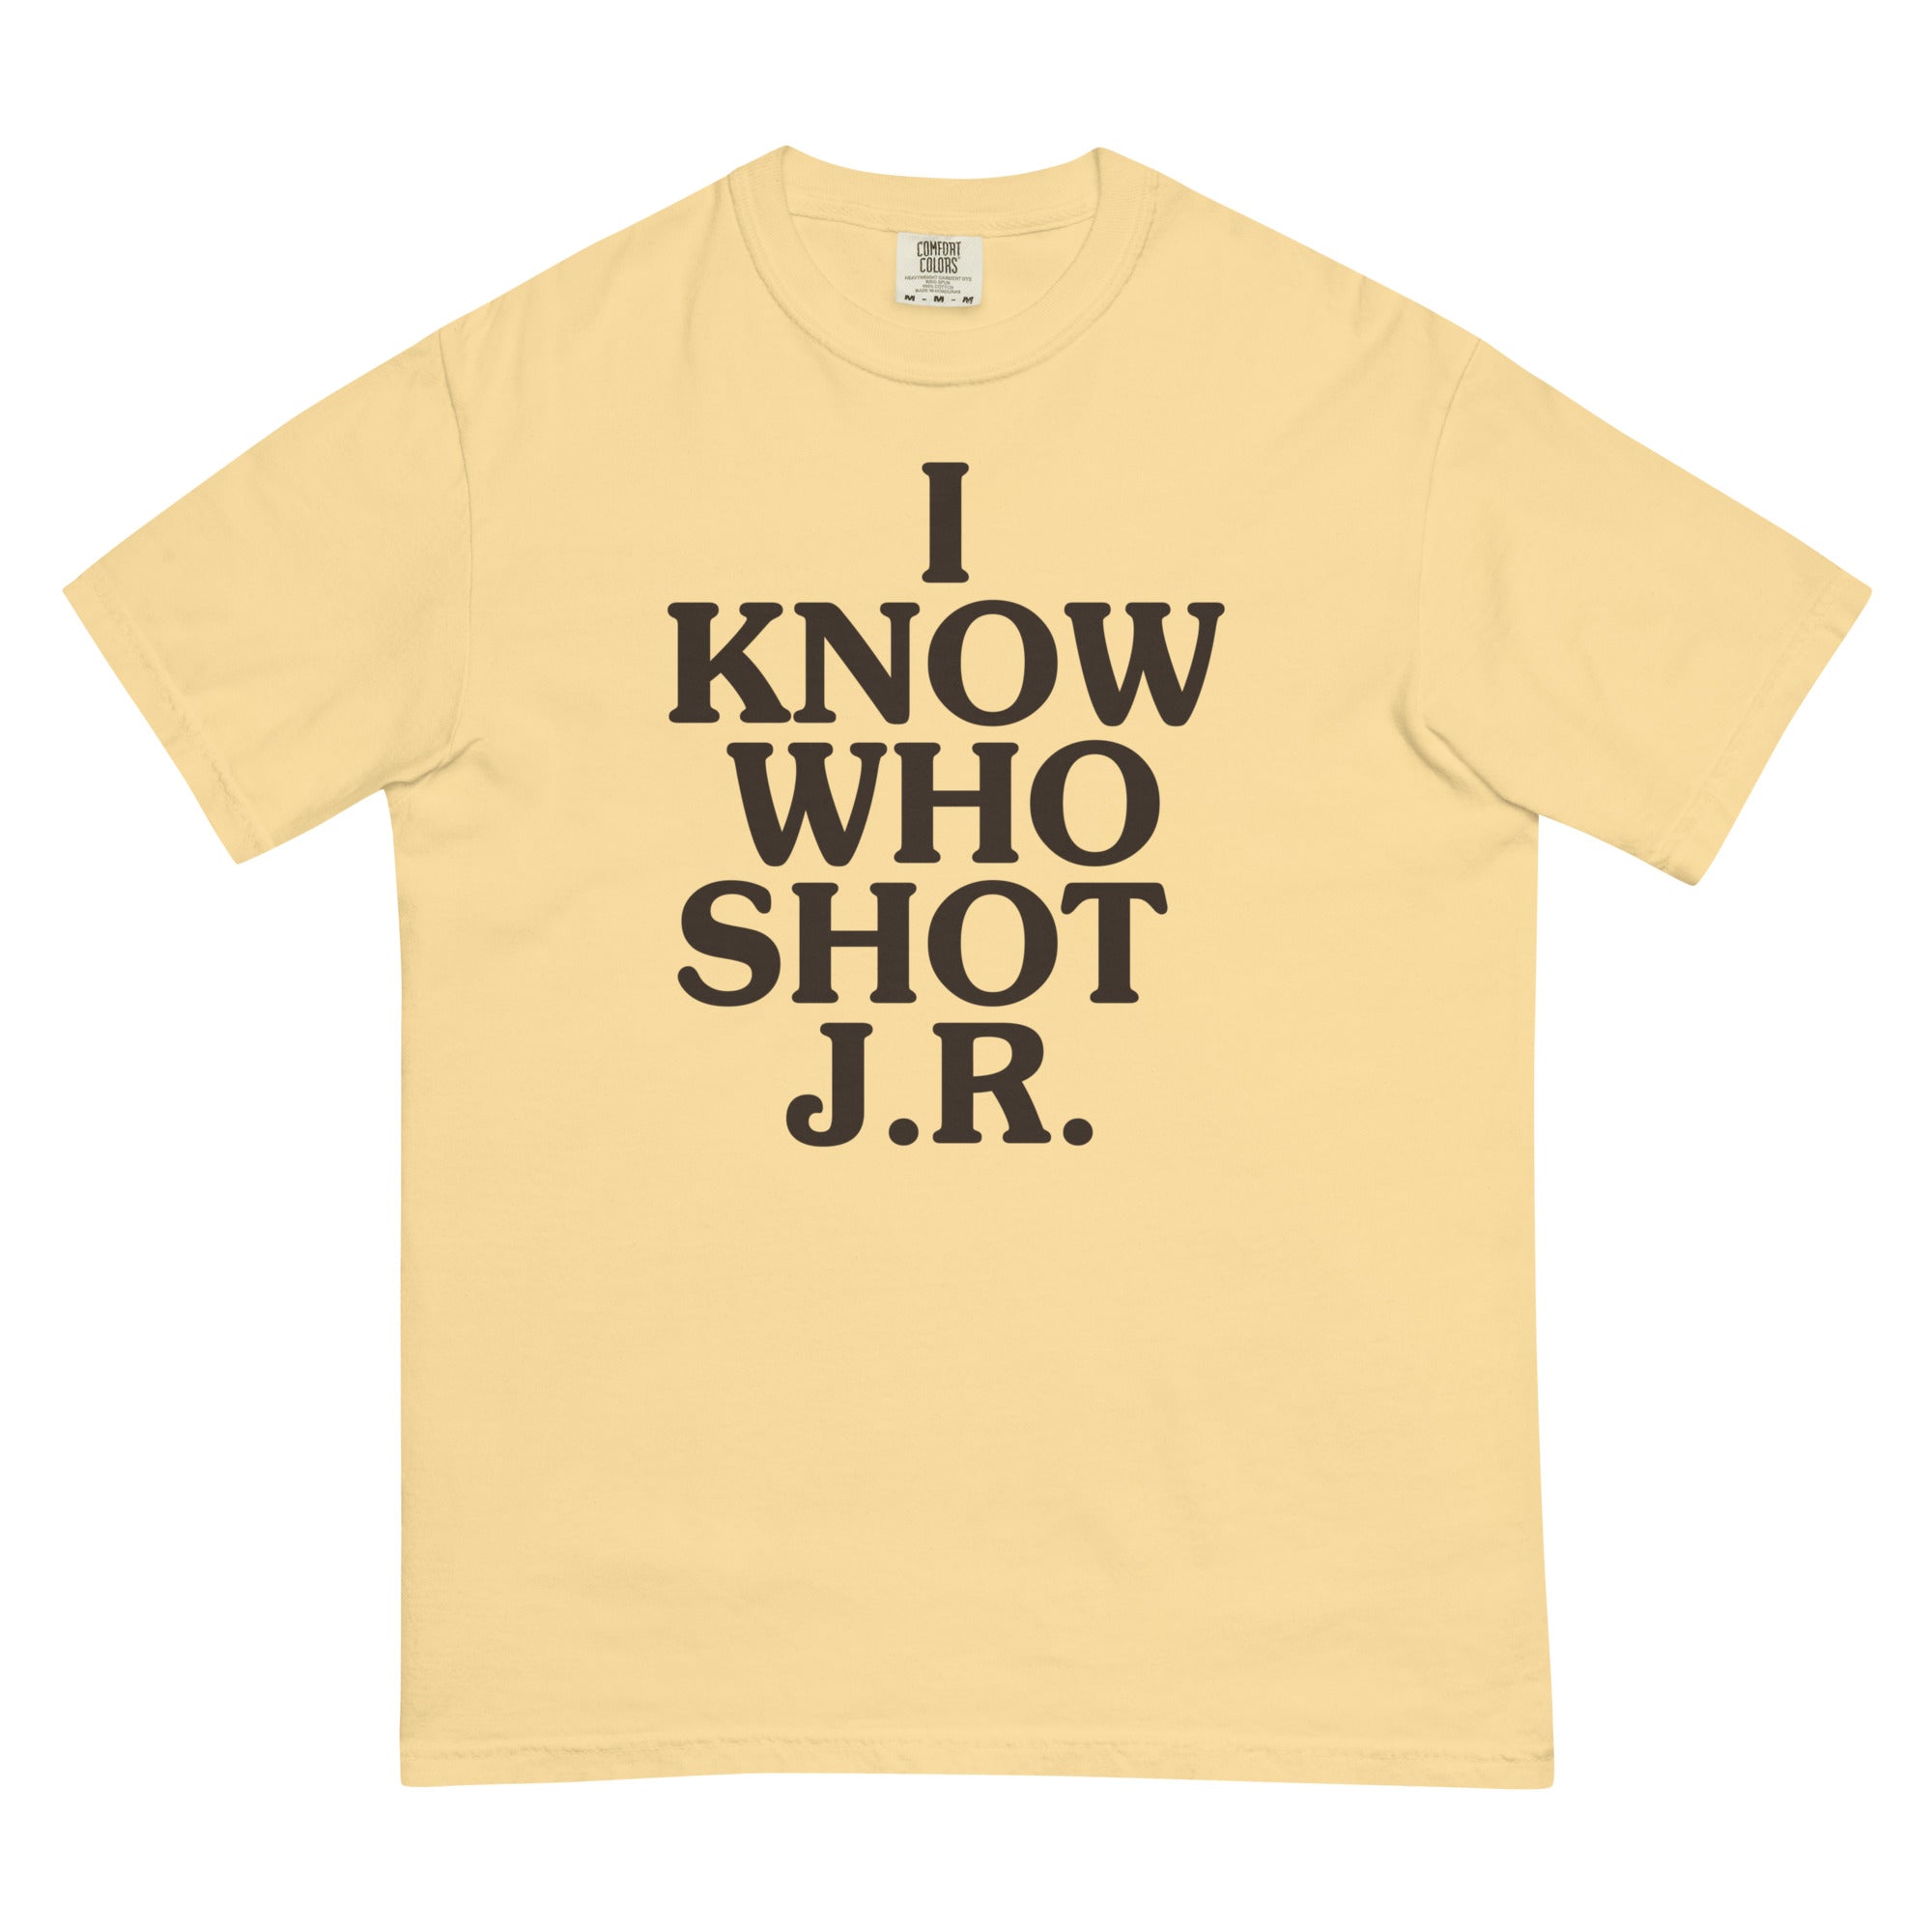 So…Alright I Know Who Shot J.R. T-Shirt